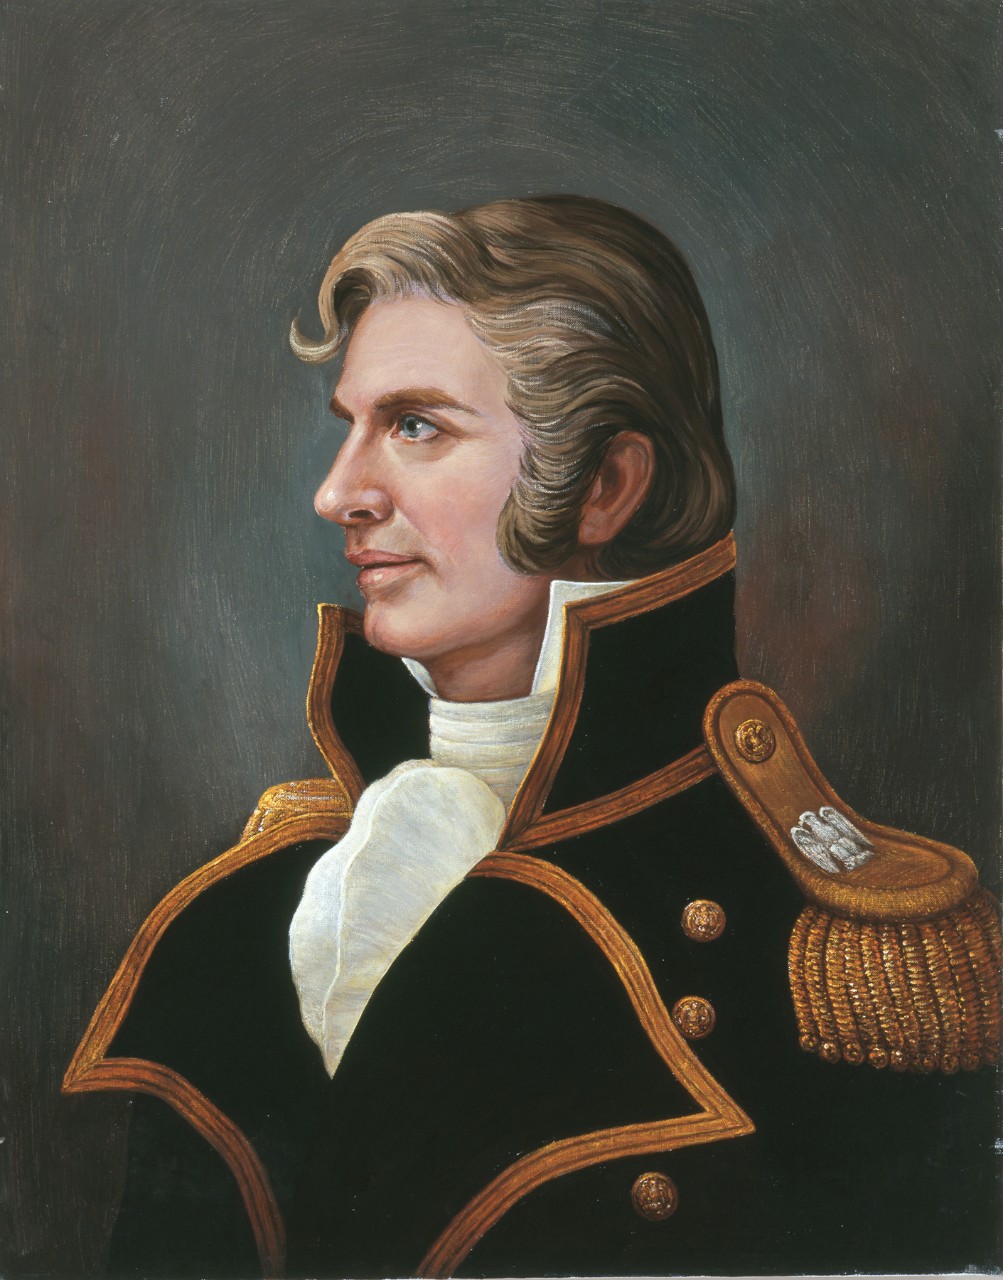 Profile portrait of Captain Charles Stewart, with a dark background